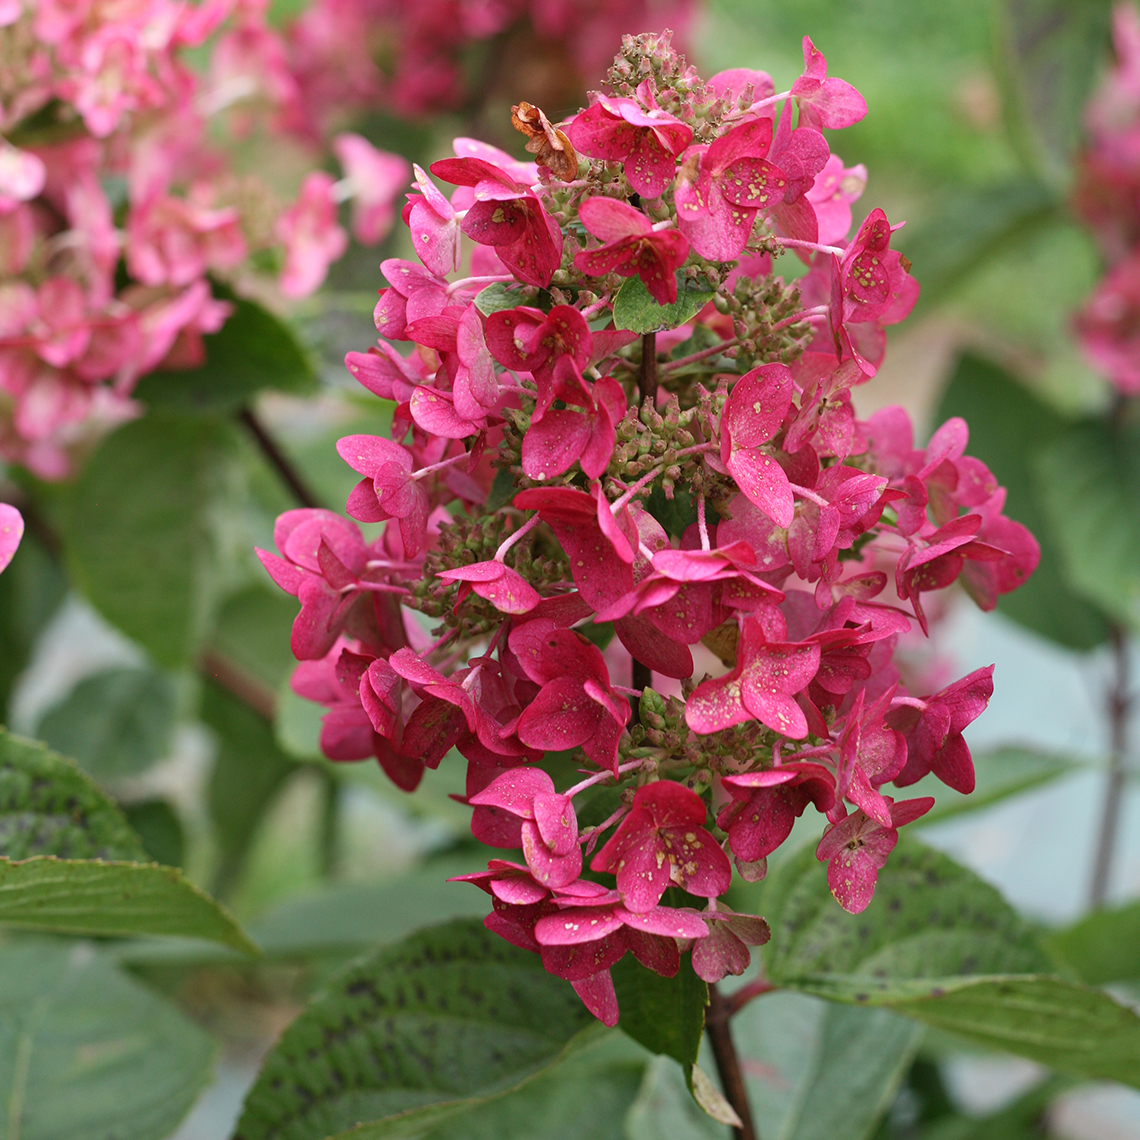 Blooms of Mega Mindy panicle hydrangea in their pink red phase